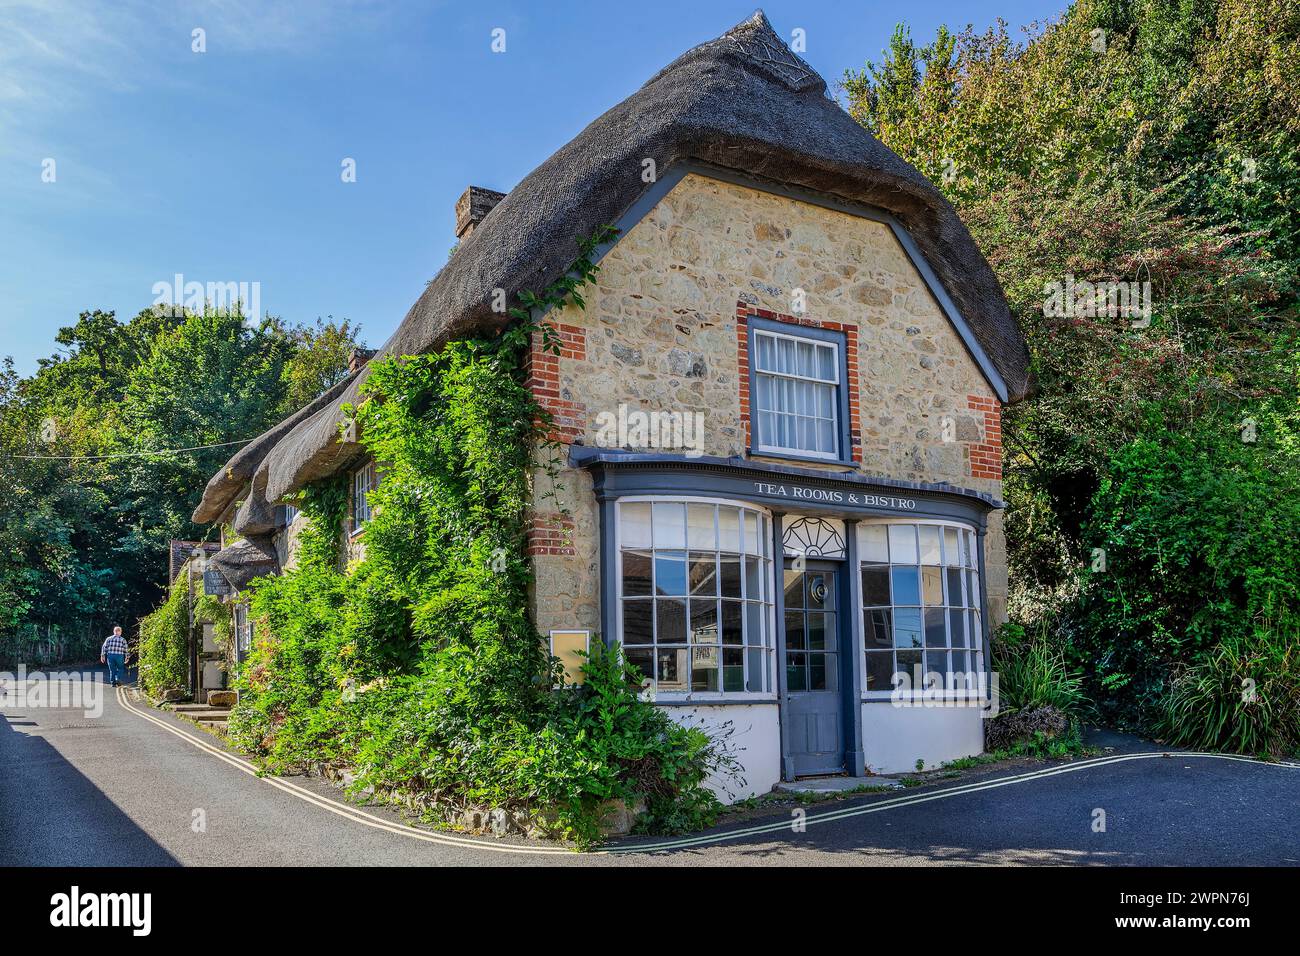 Thatched country house, Godshill, Isle of Wight, Hampshire, Great Britain, England Stock Photo